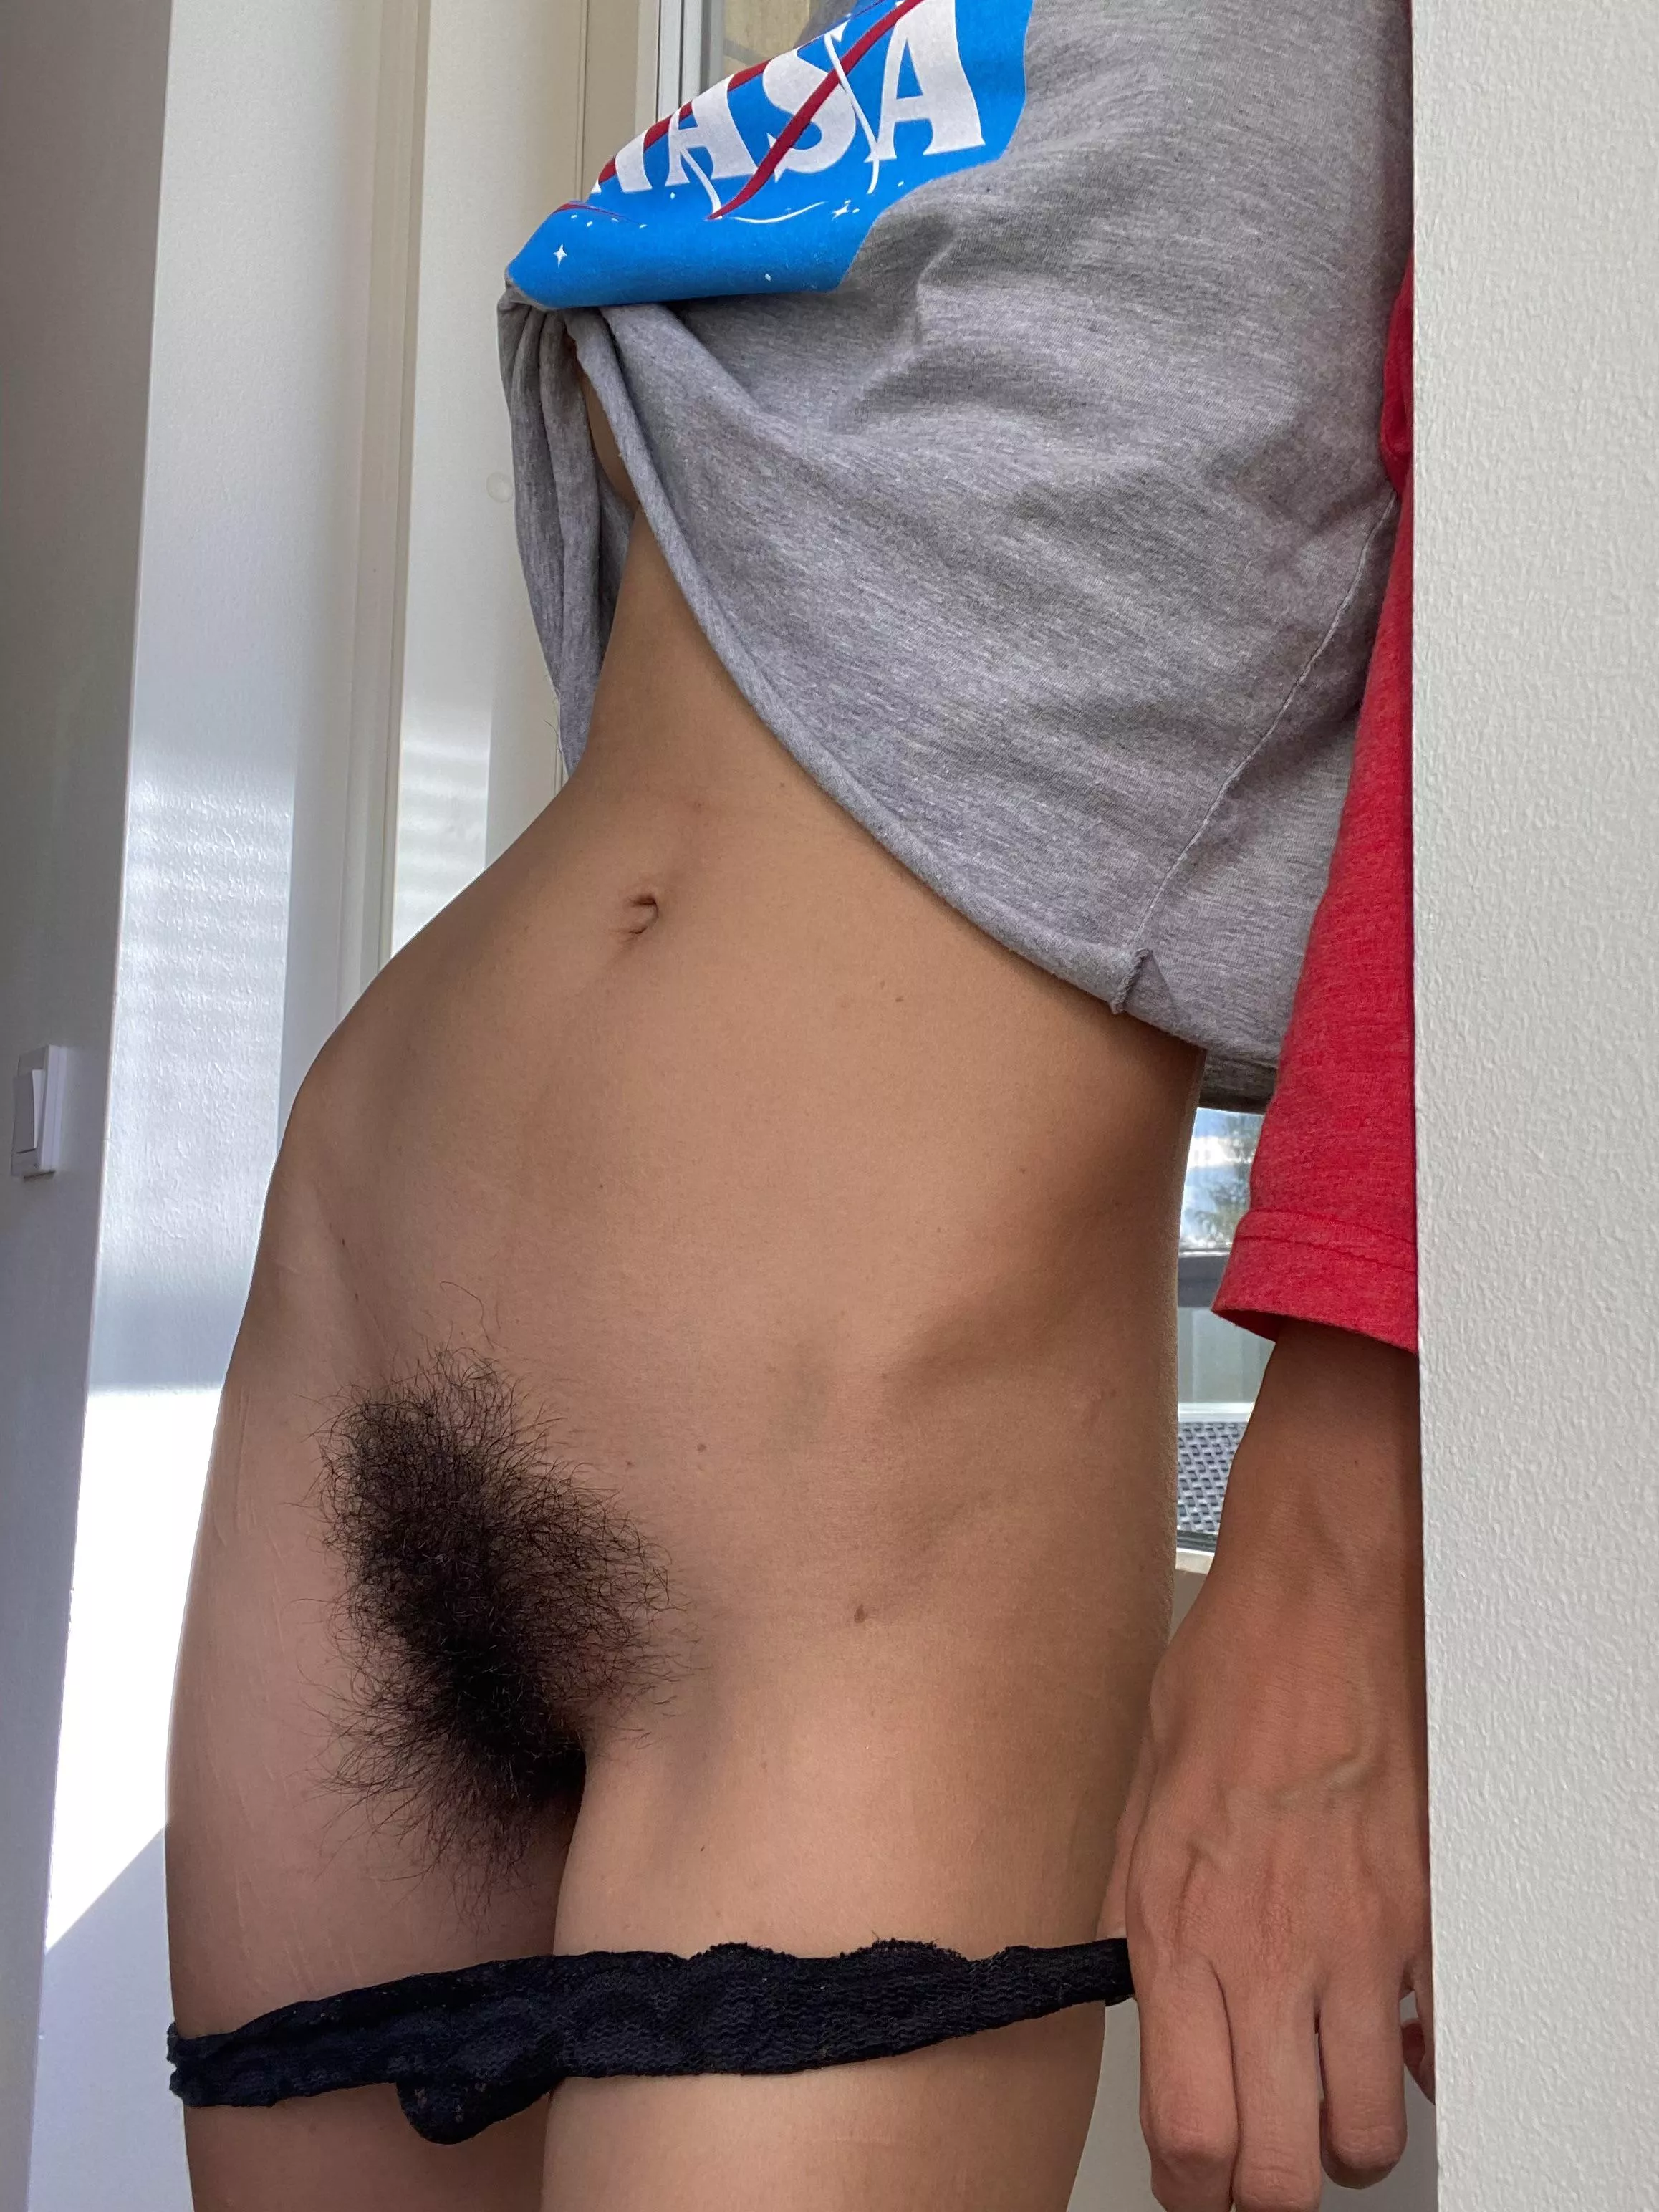 I had a feeling you guys would appreciate my very hairy pussy todayâ€¦ nudes  by sexretivy